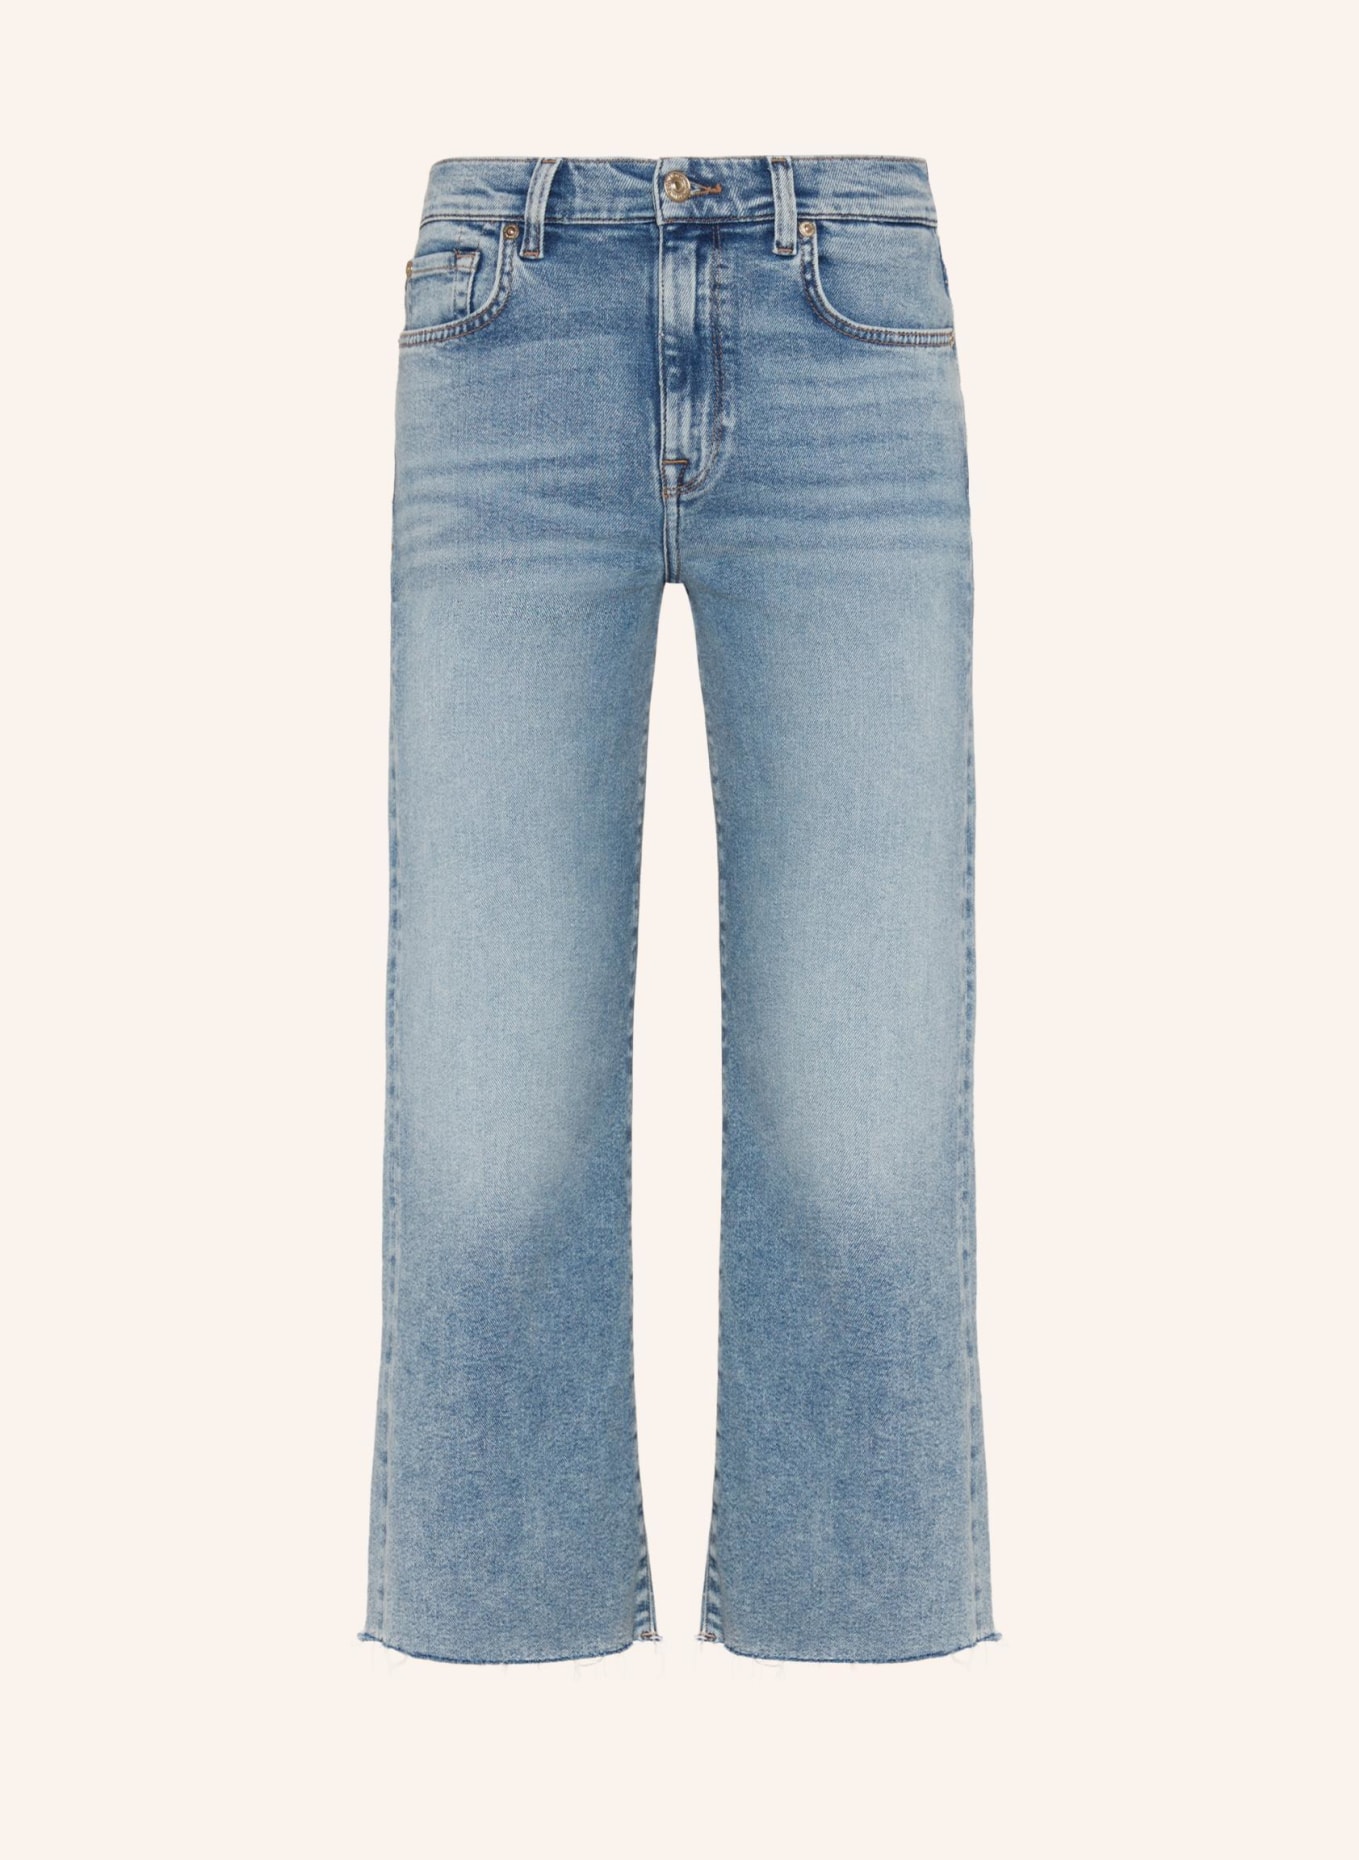 7 for all mankind Jeans CROPPED ALEXA Flare Fit, Farbe: BLAU (Bild 1)